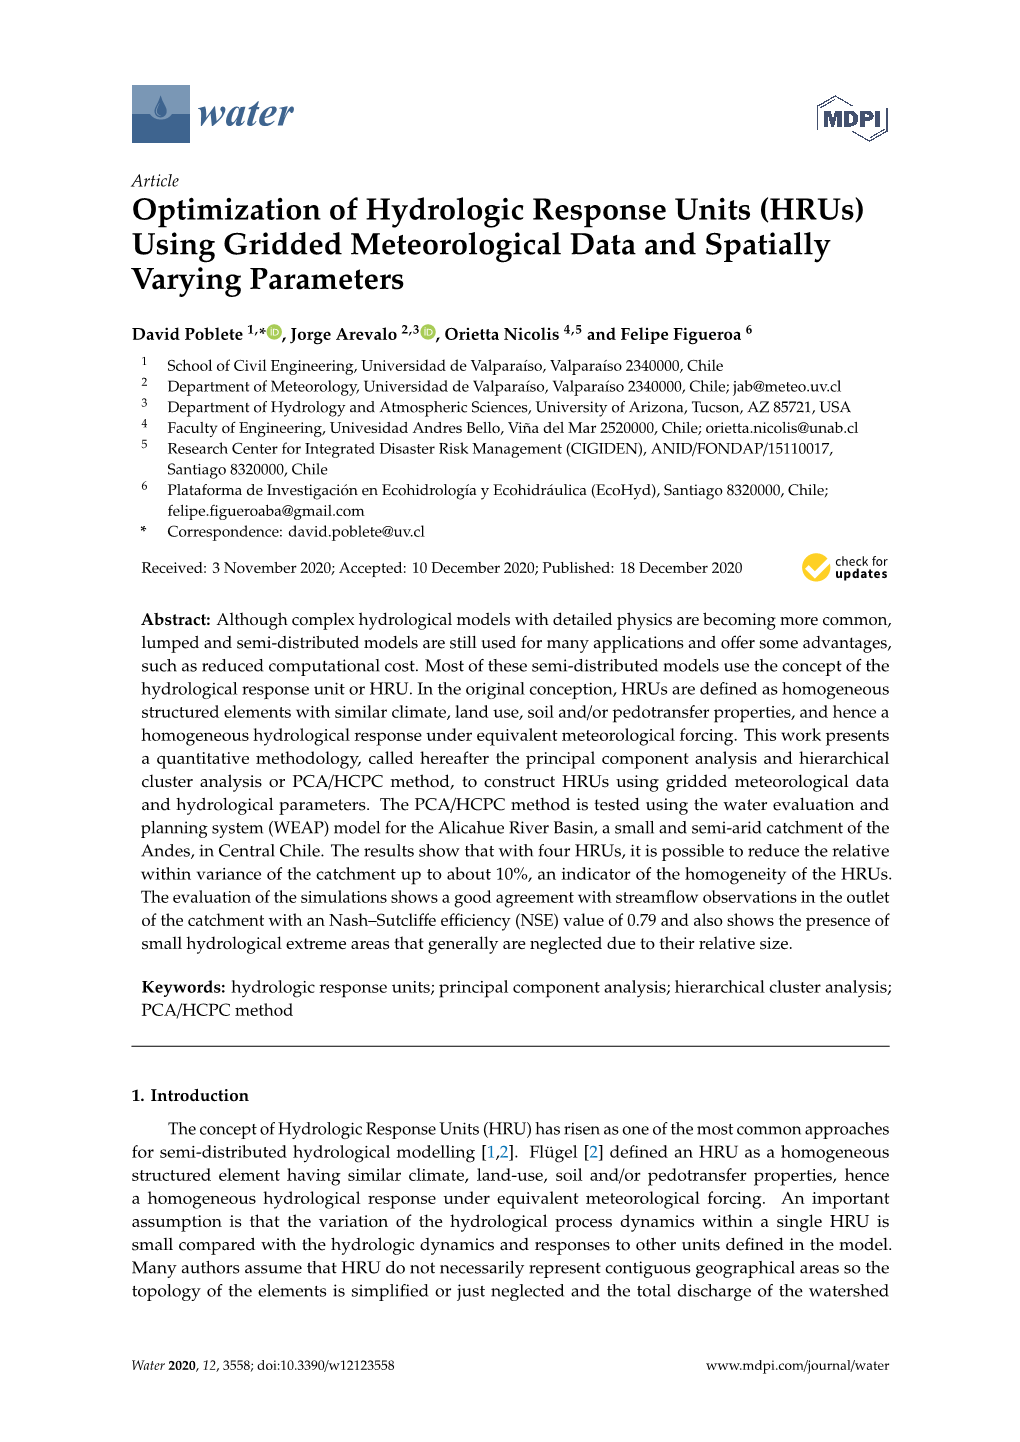 Optimization of Hydrologic Response Units (Hrus) Using Gridded Meteorological Data and Spatially Varying Parameters